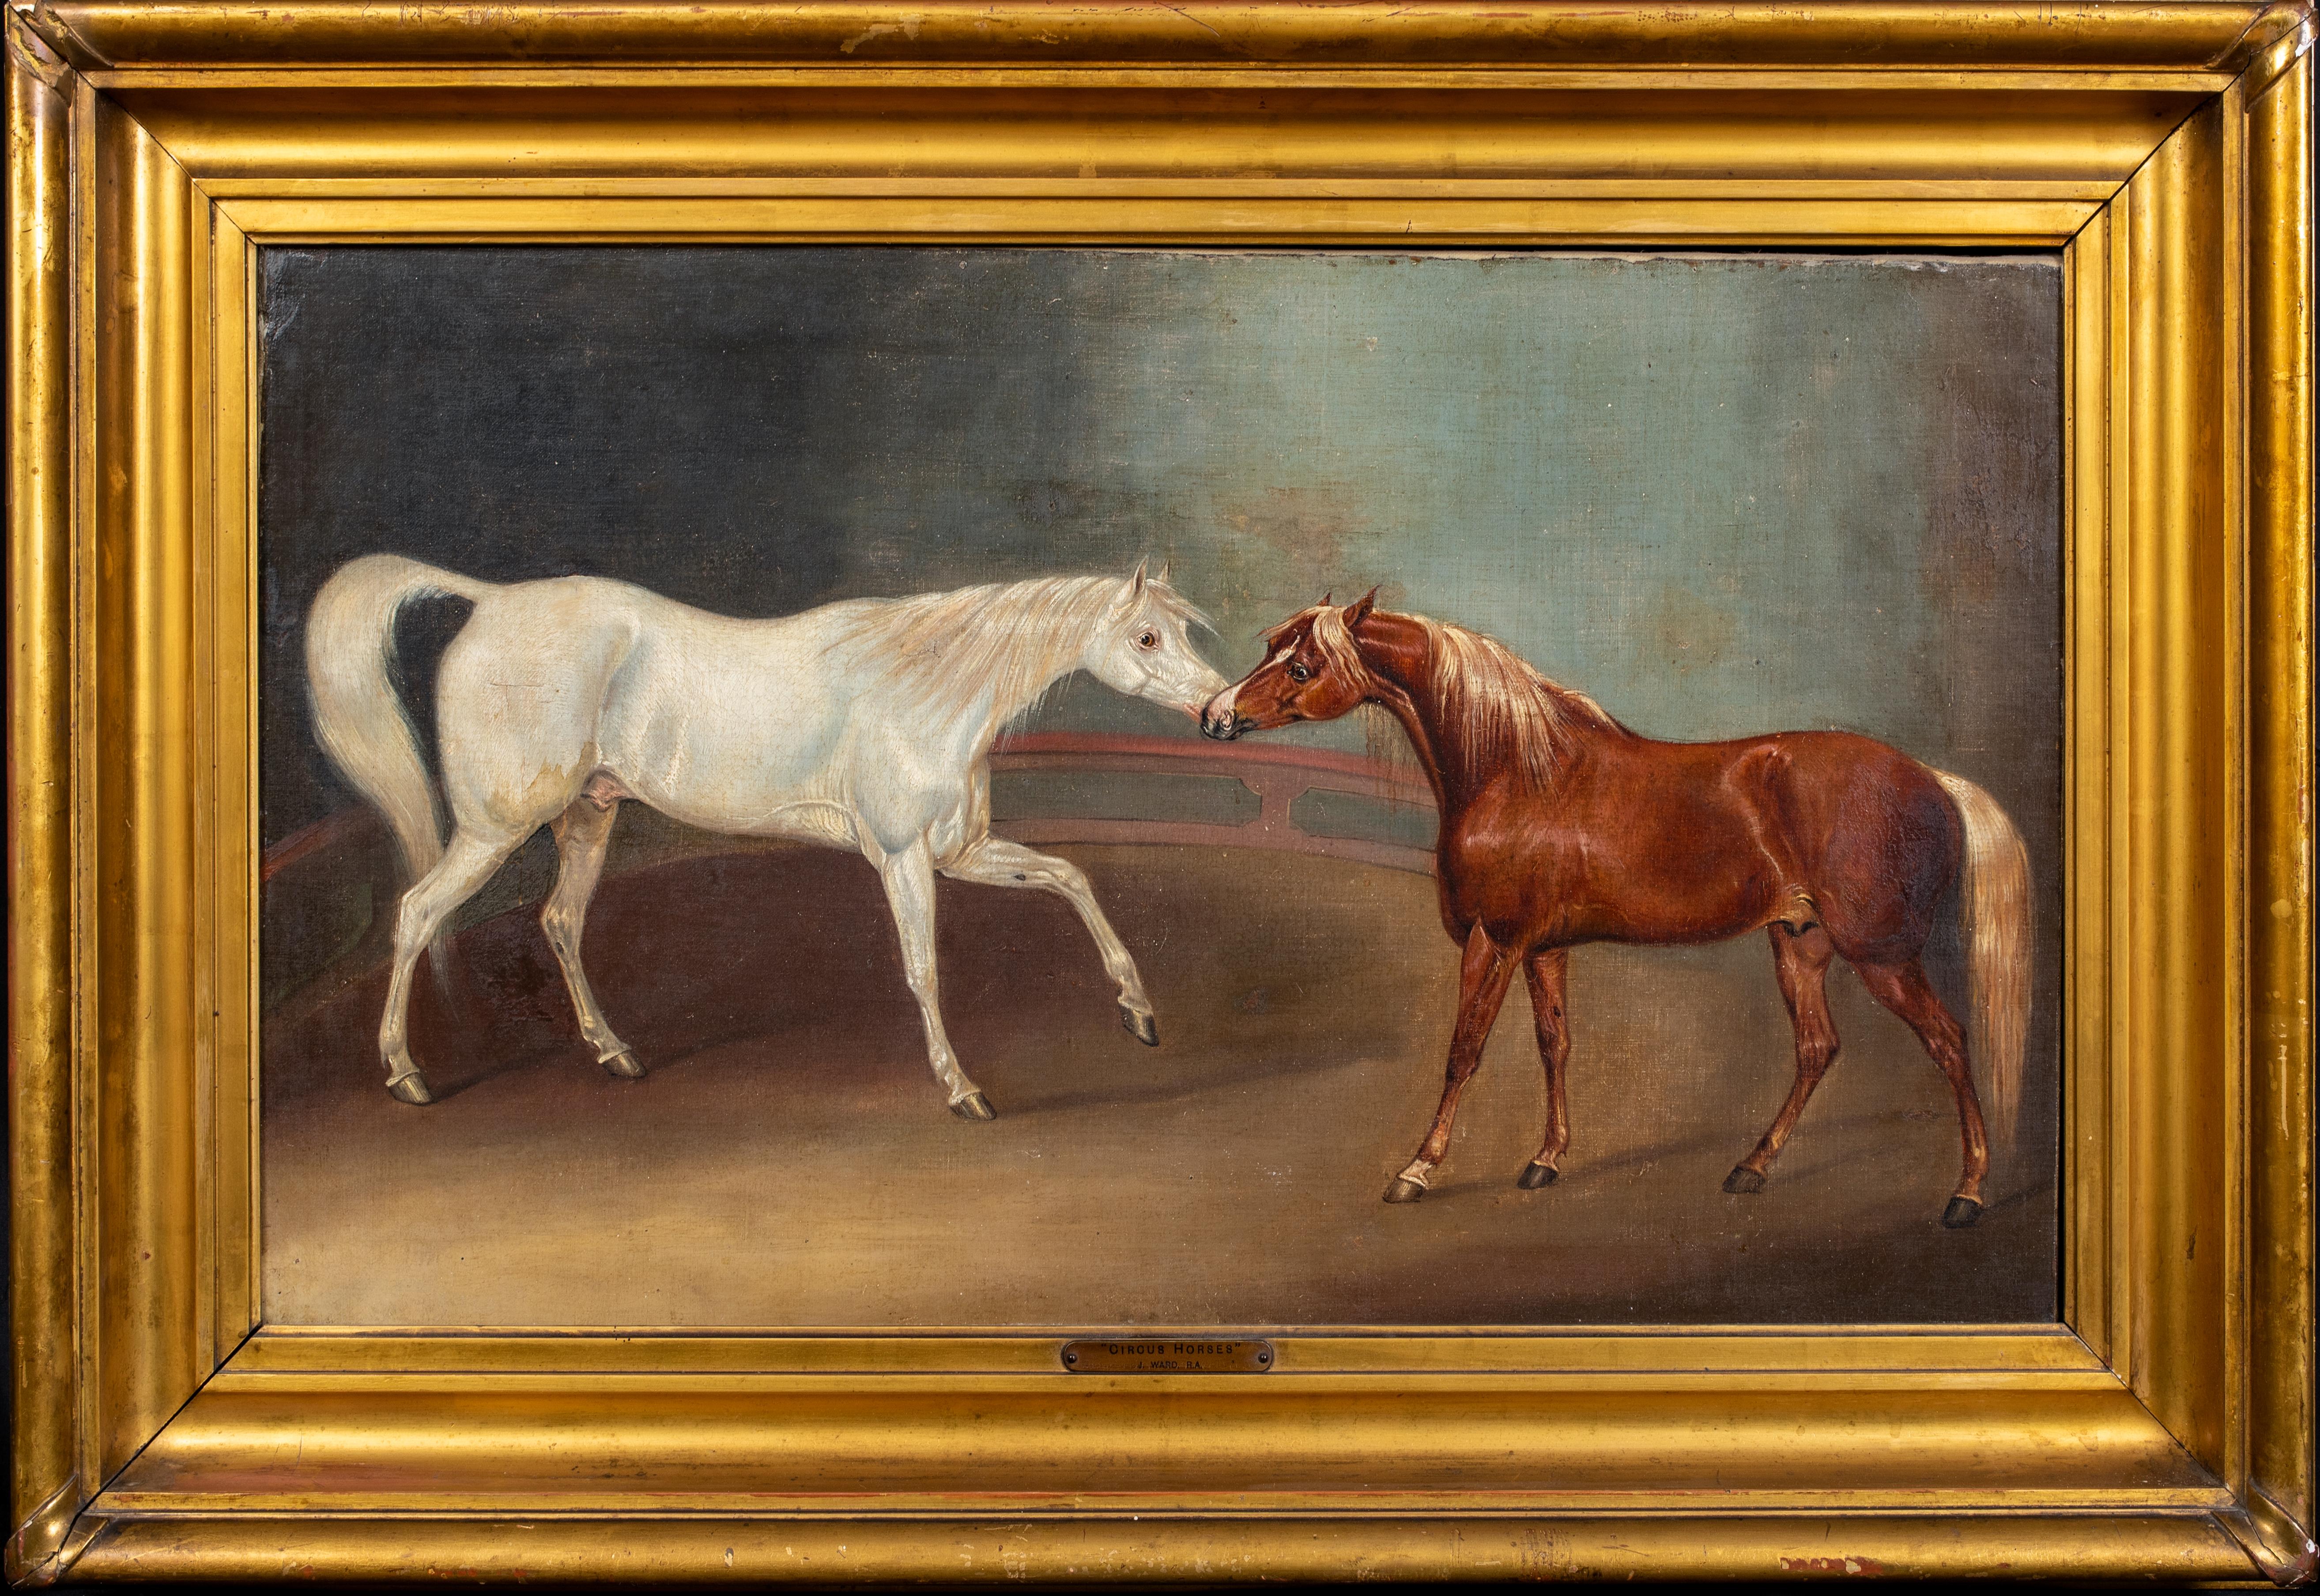 James Ward Portrait Painting - Circus Horses, 19th Century  by James WARD (1769-1859) 